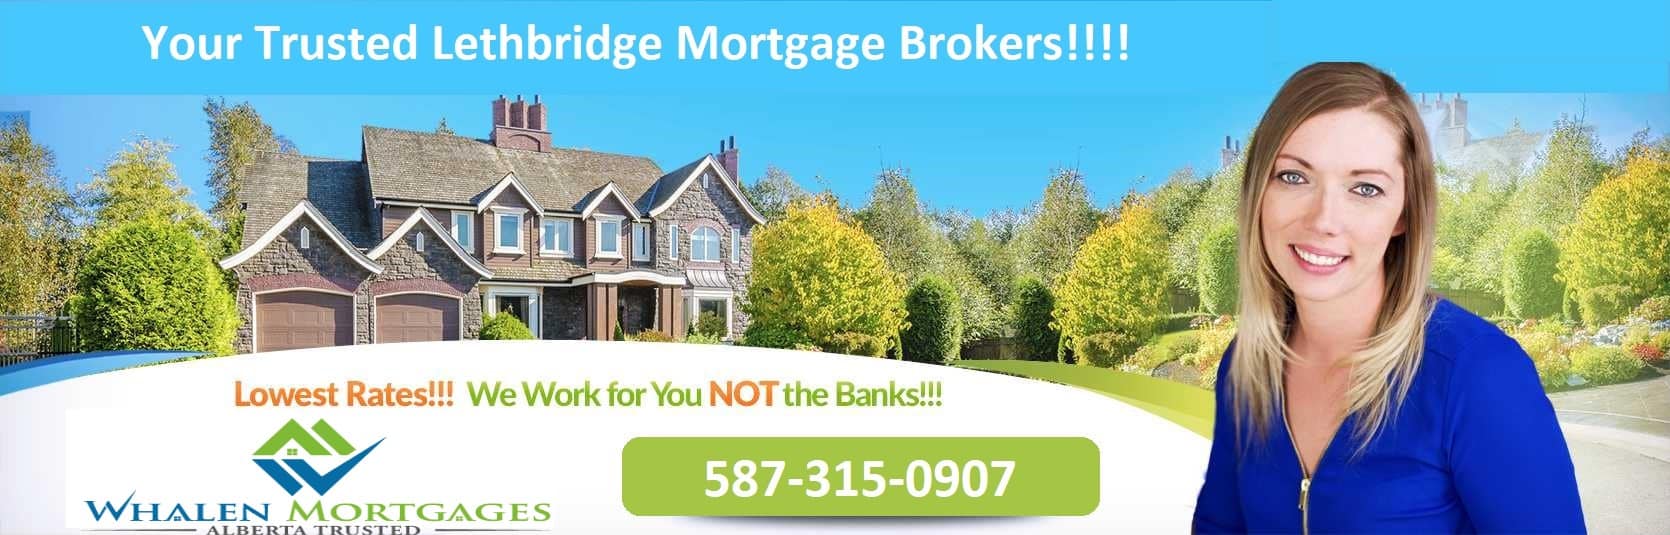 5 Year Variable Mortgage Rate Lethbridge Lowest Rates